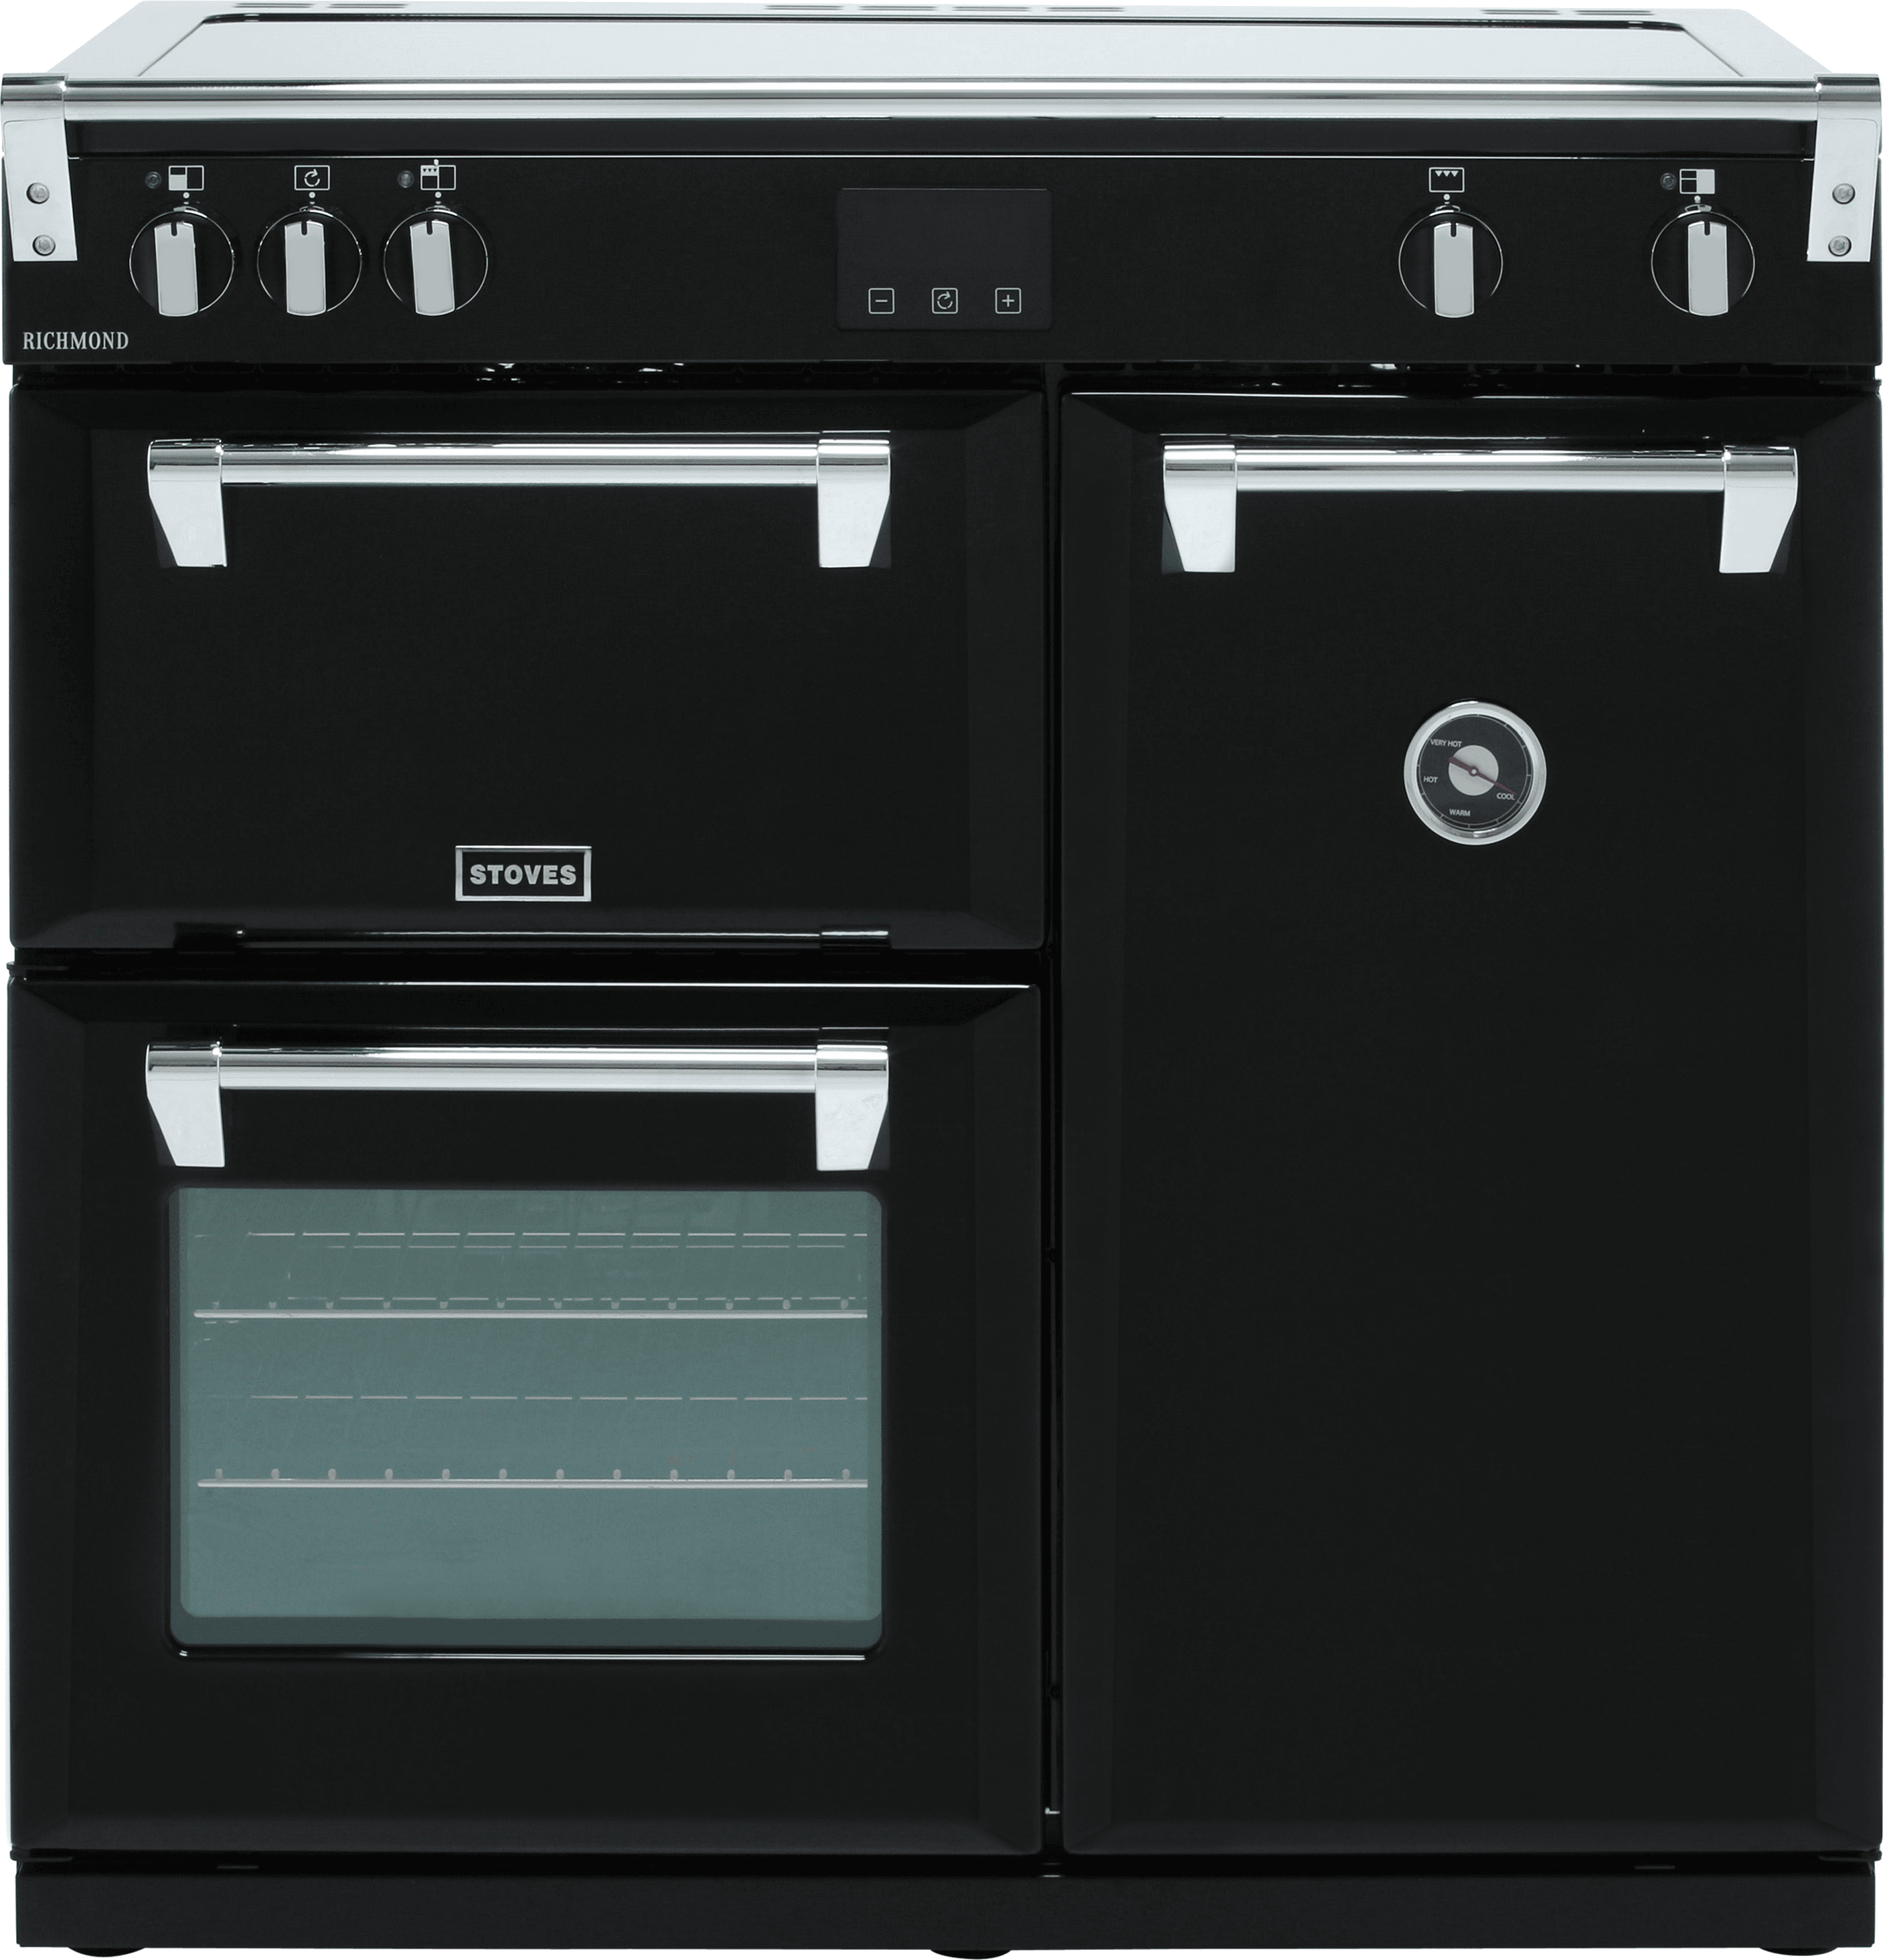 Stoves Richmond S900Ei 90cm Electric Range Cooker with Induction Hob - Black - A/A/A Rated, Black